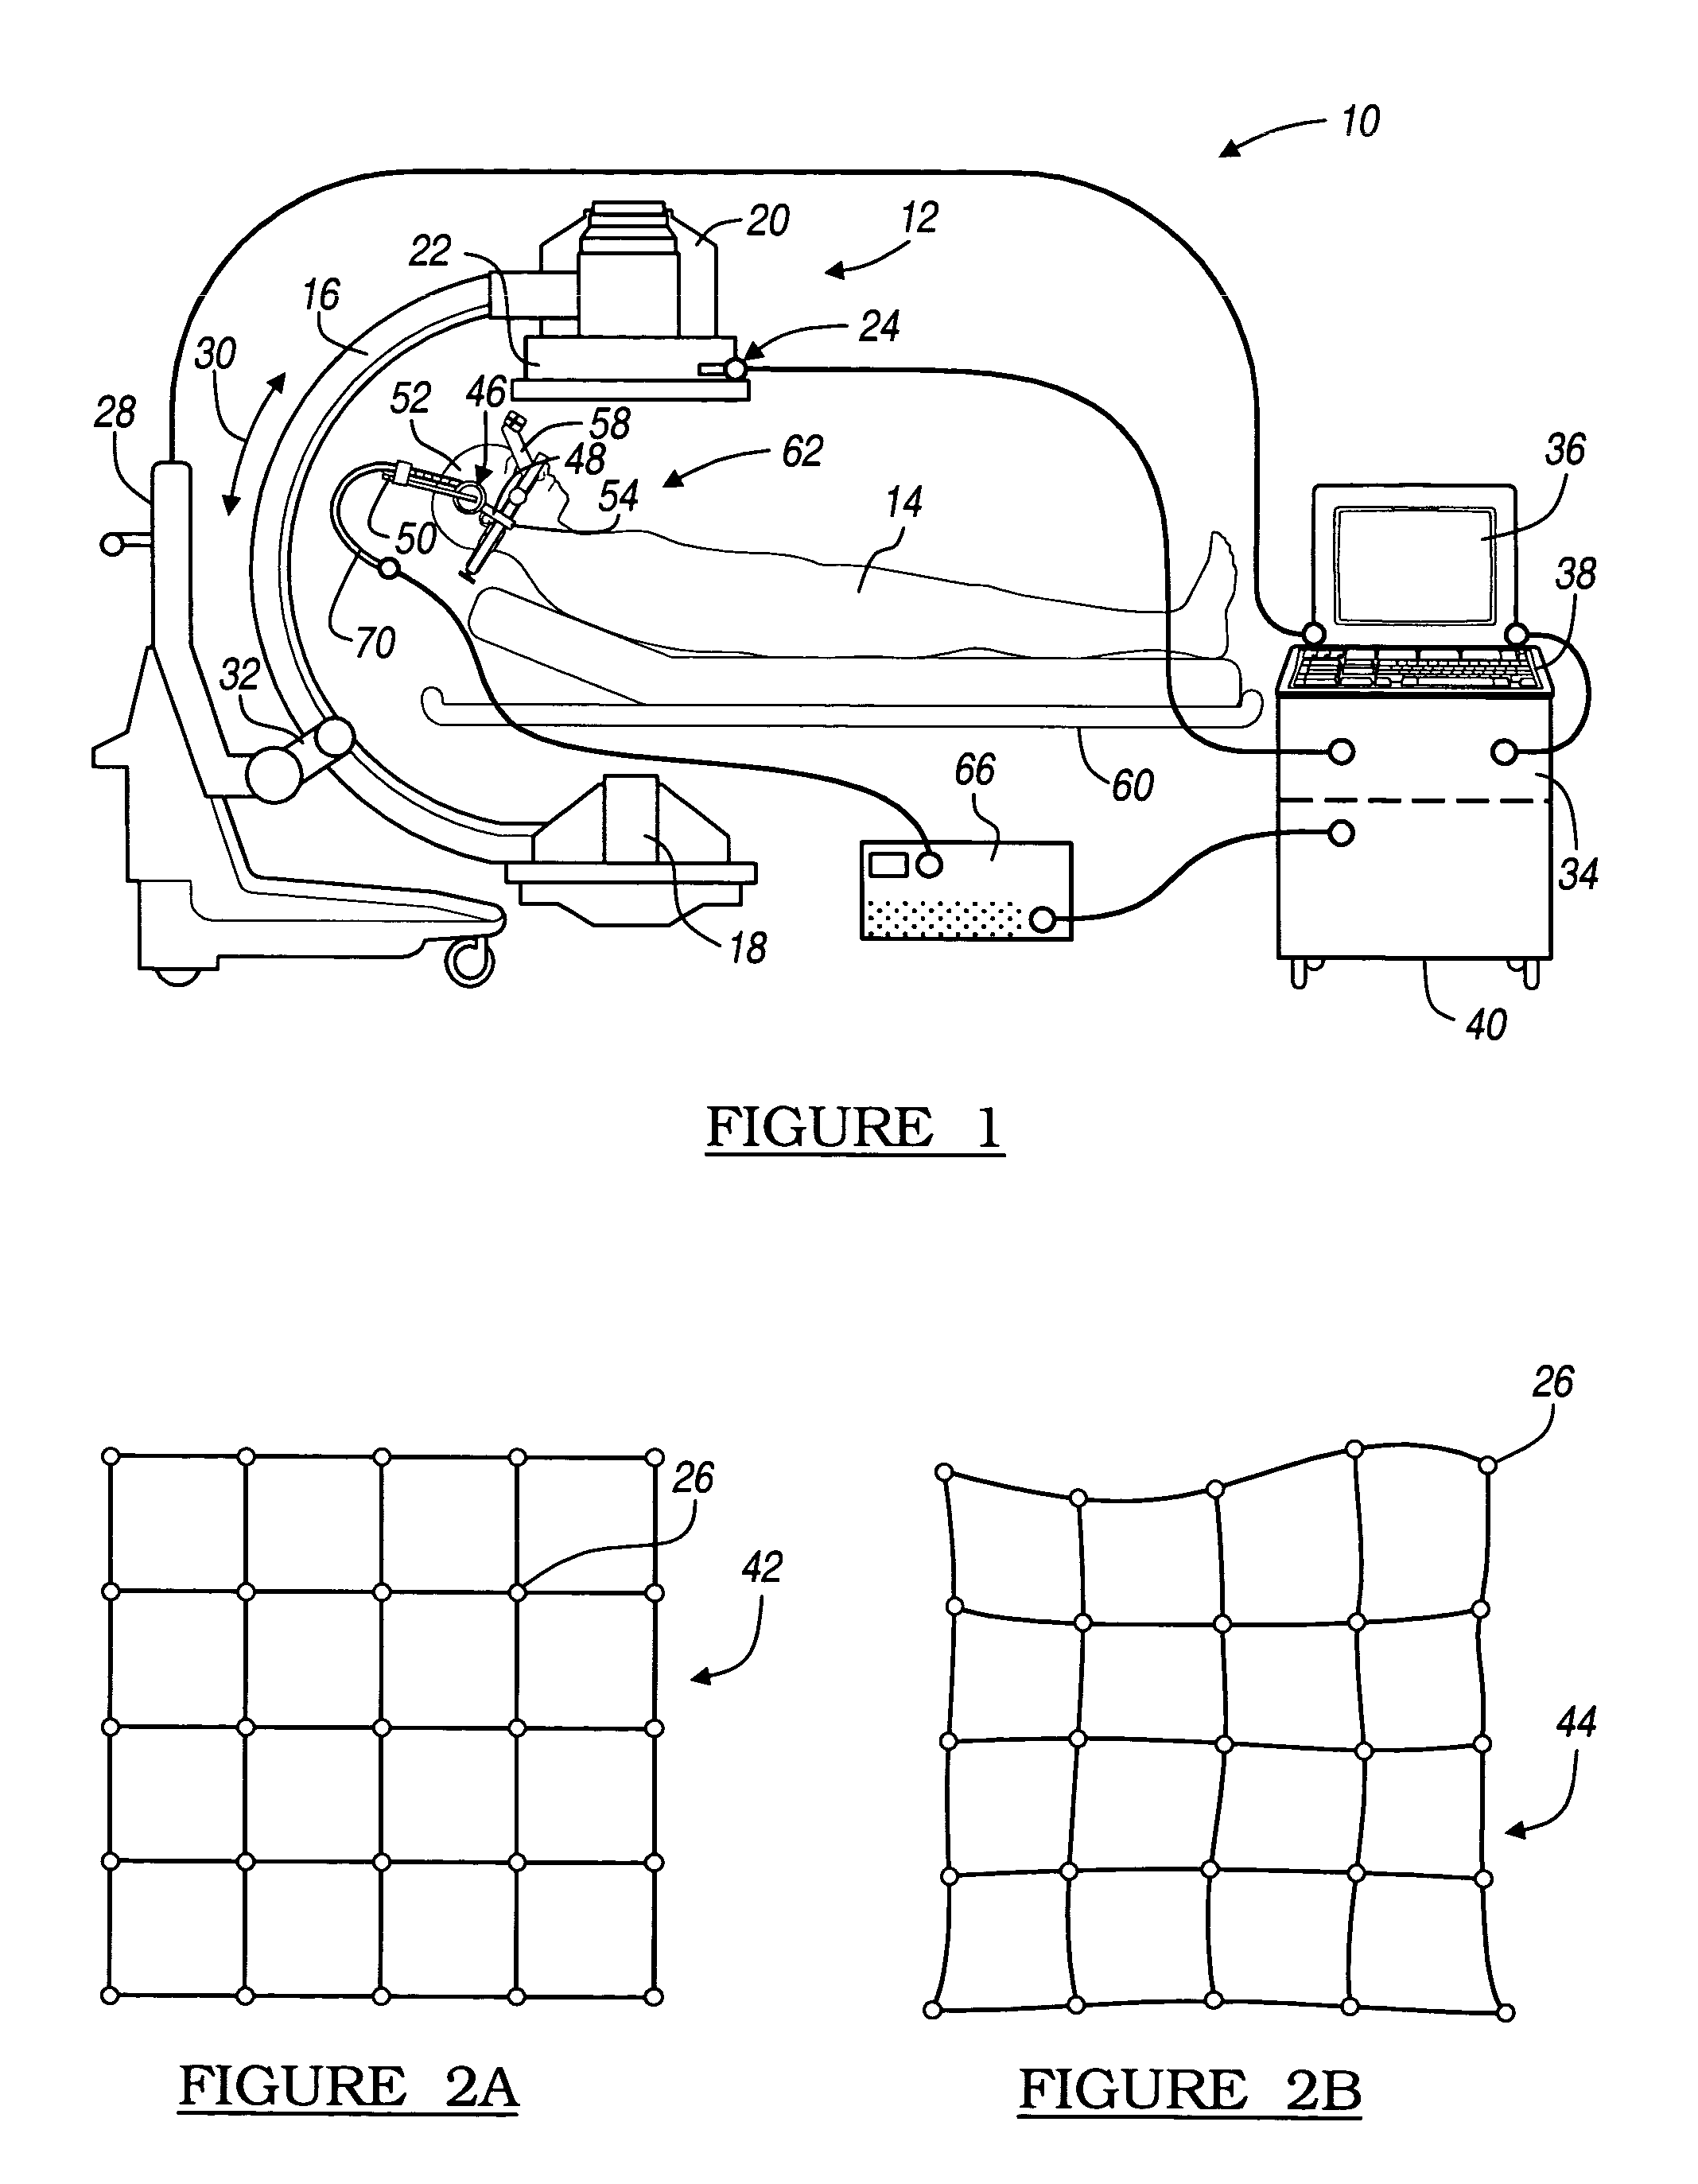 Method and apparatus for performing stereotactic surgery